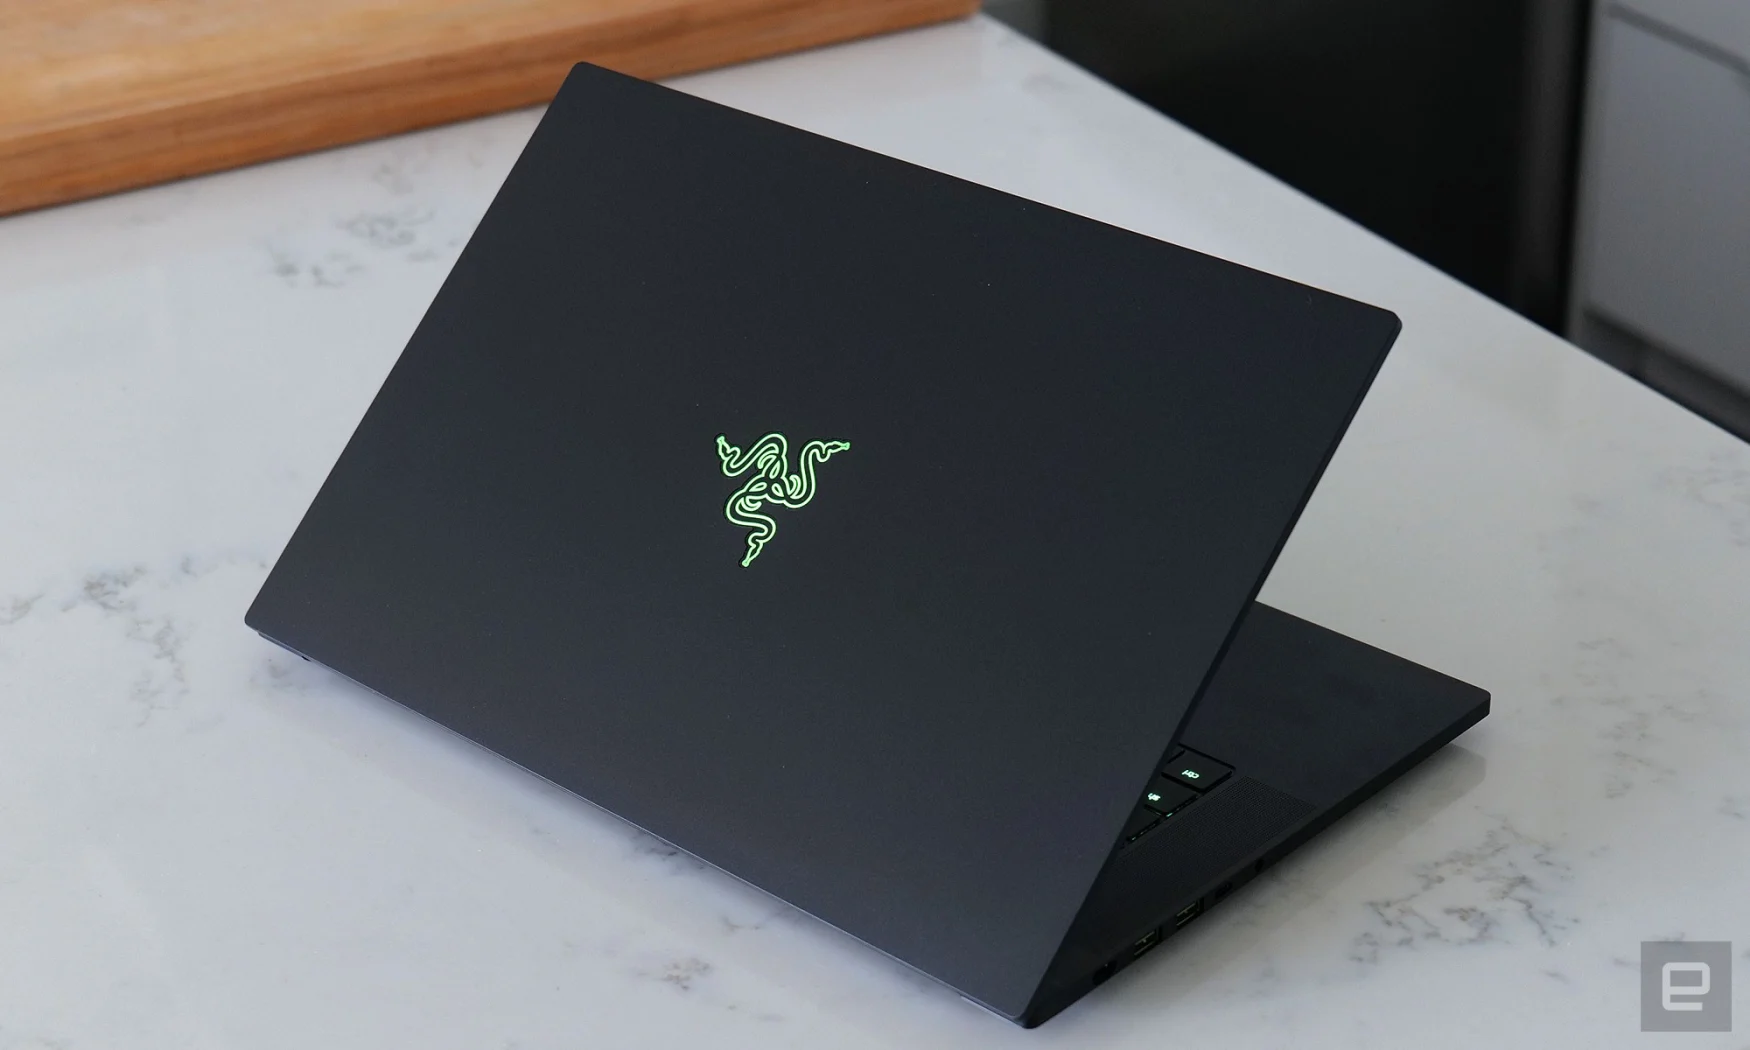 The Razer logo on the Blade 15's lid lights up, but you only get one color option: neon green. 